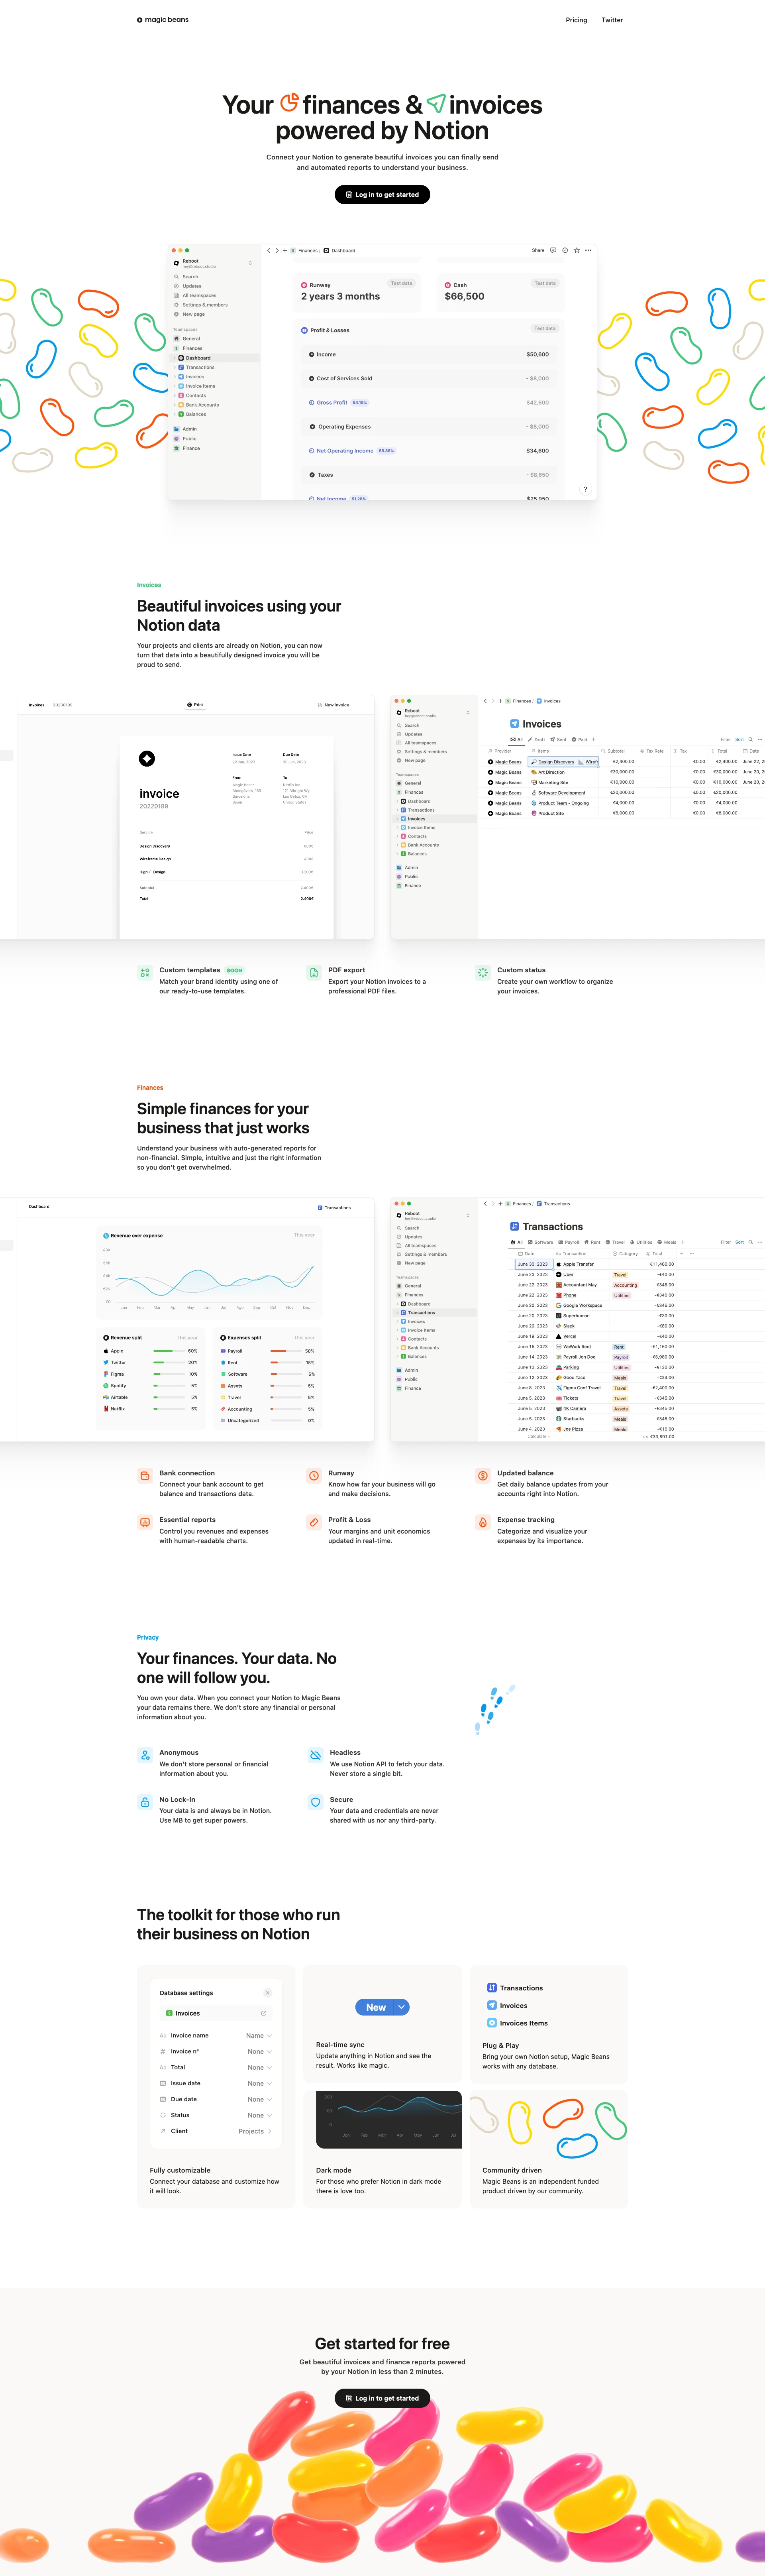 Magic Beans Landing Page Example: Create invoices, track expenses and get complete financial reports of your business powered by Notion.